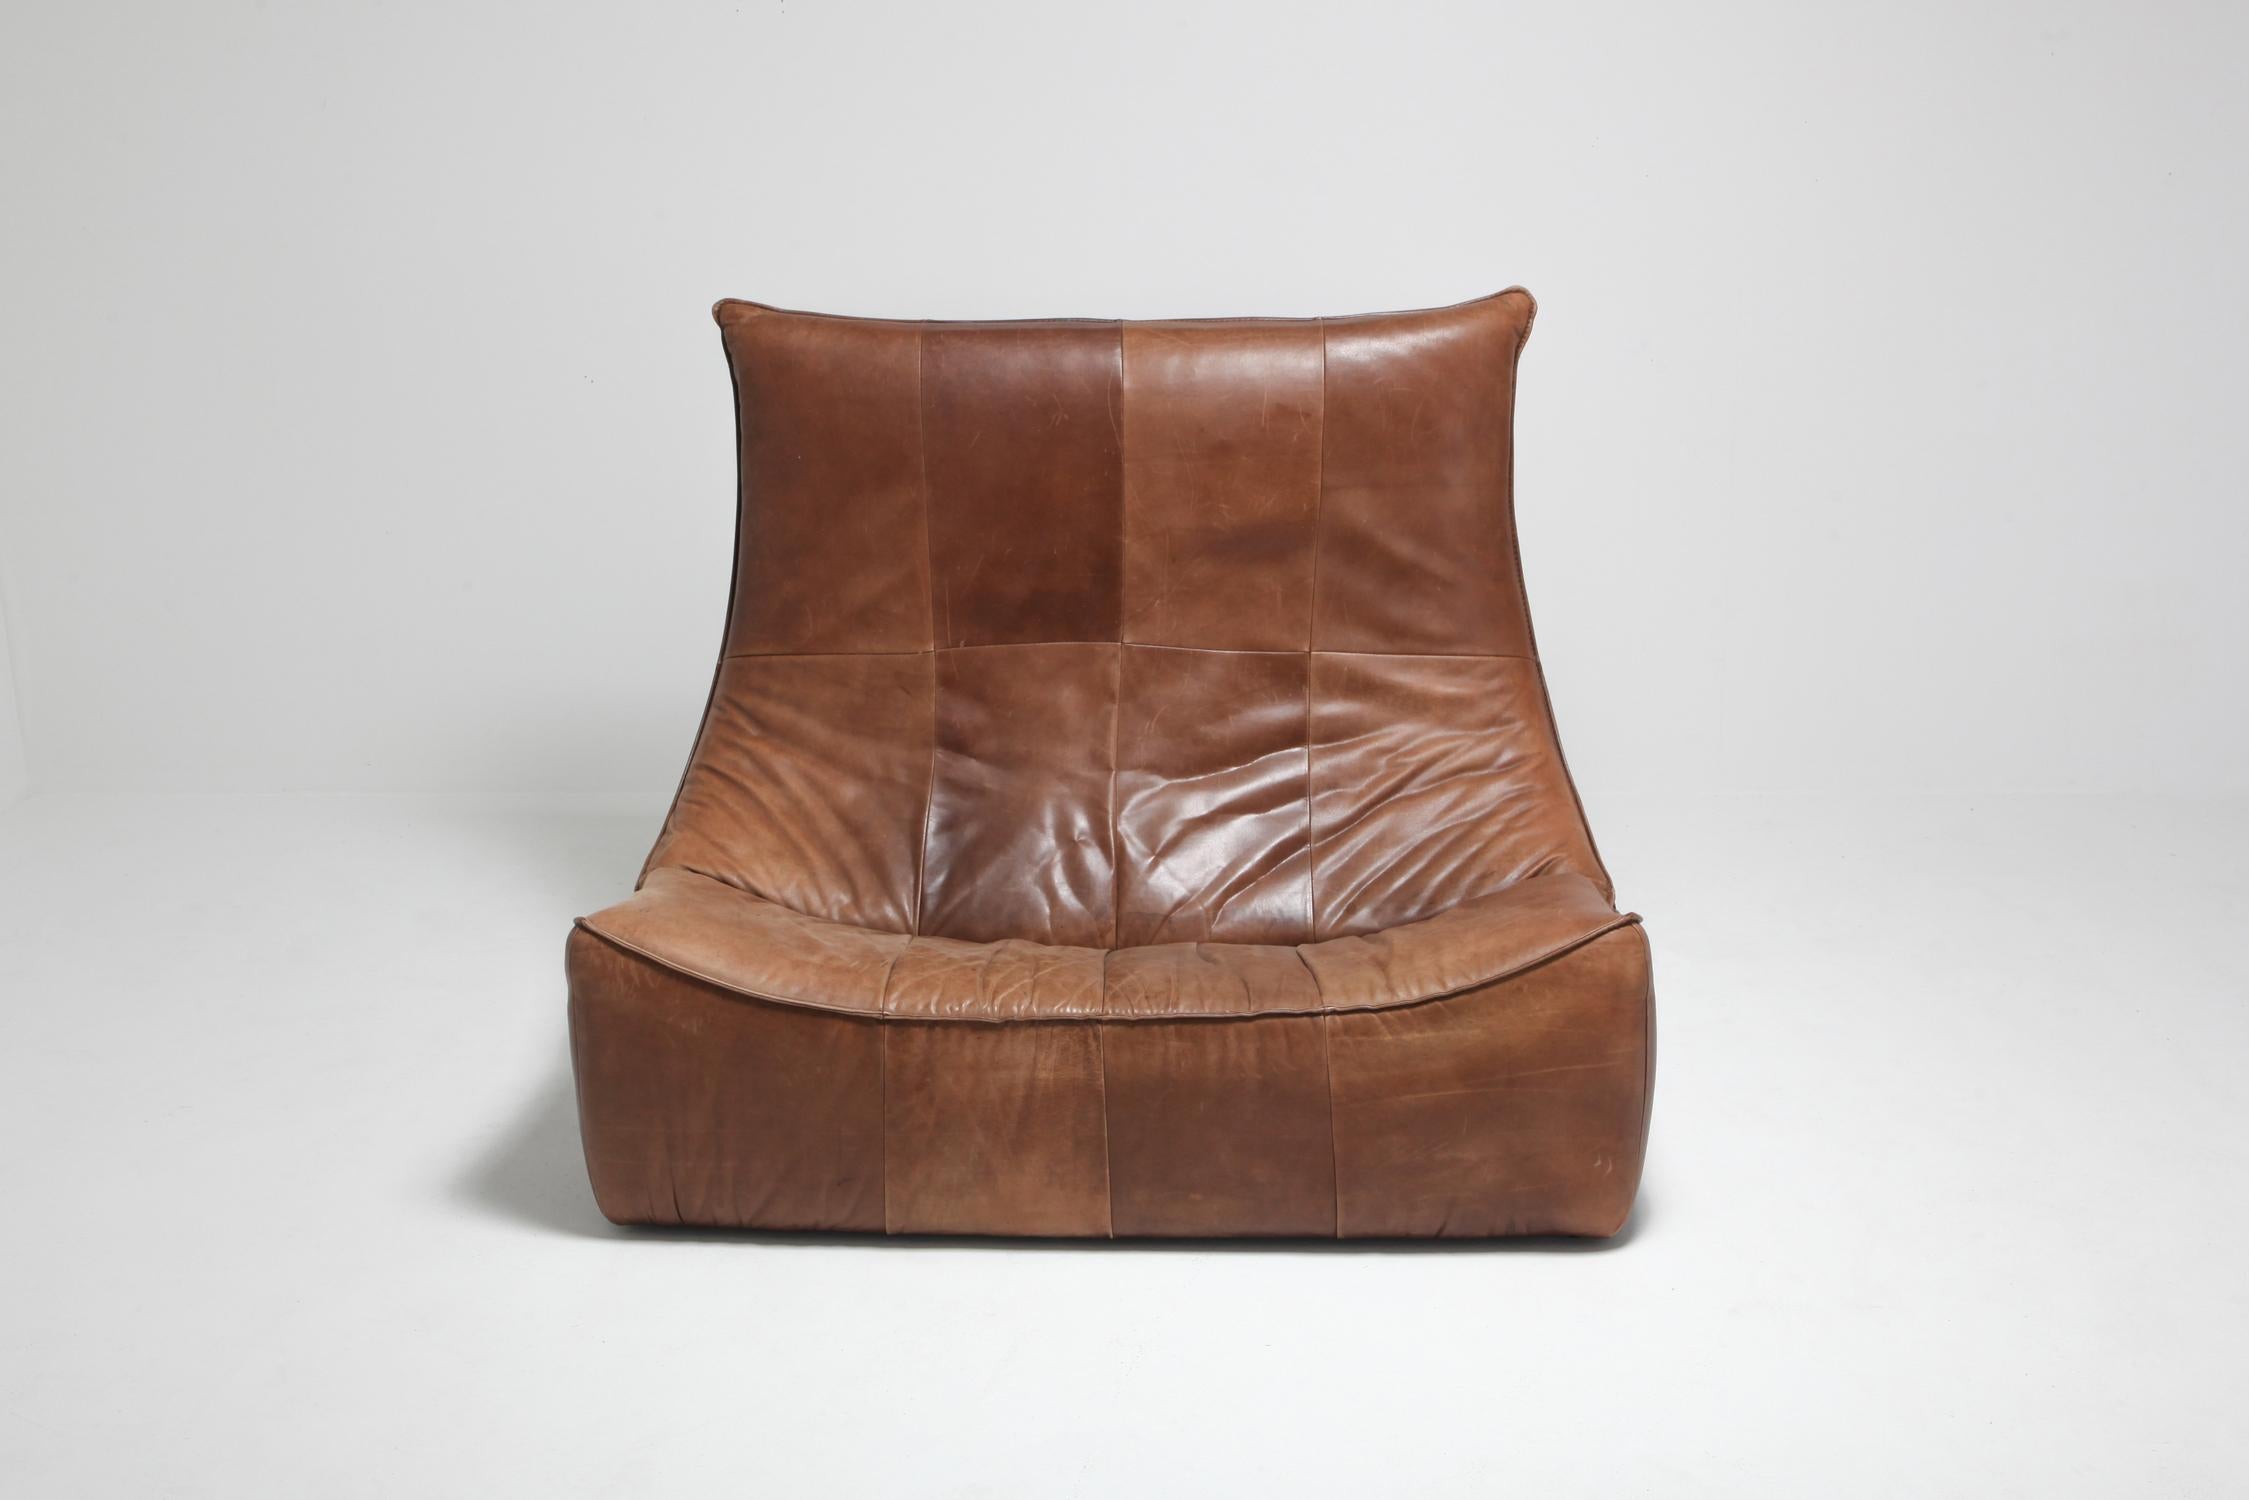 Sofa by Gerard Van Den Berg, for Montis, The Netherlands, 1970s
Mid-Century Modern luxury leather vintage high back couch 'The Rock'.
It's magnificent design let's the piece act as a room divider or screen at the same time as being a sofa.
Made